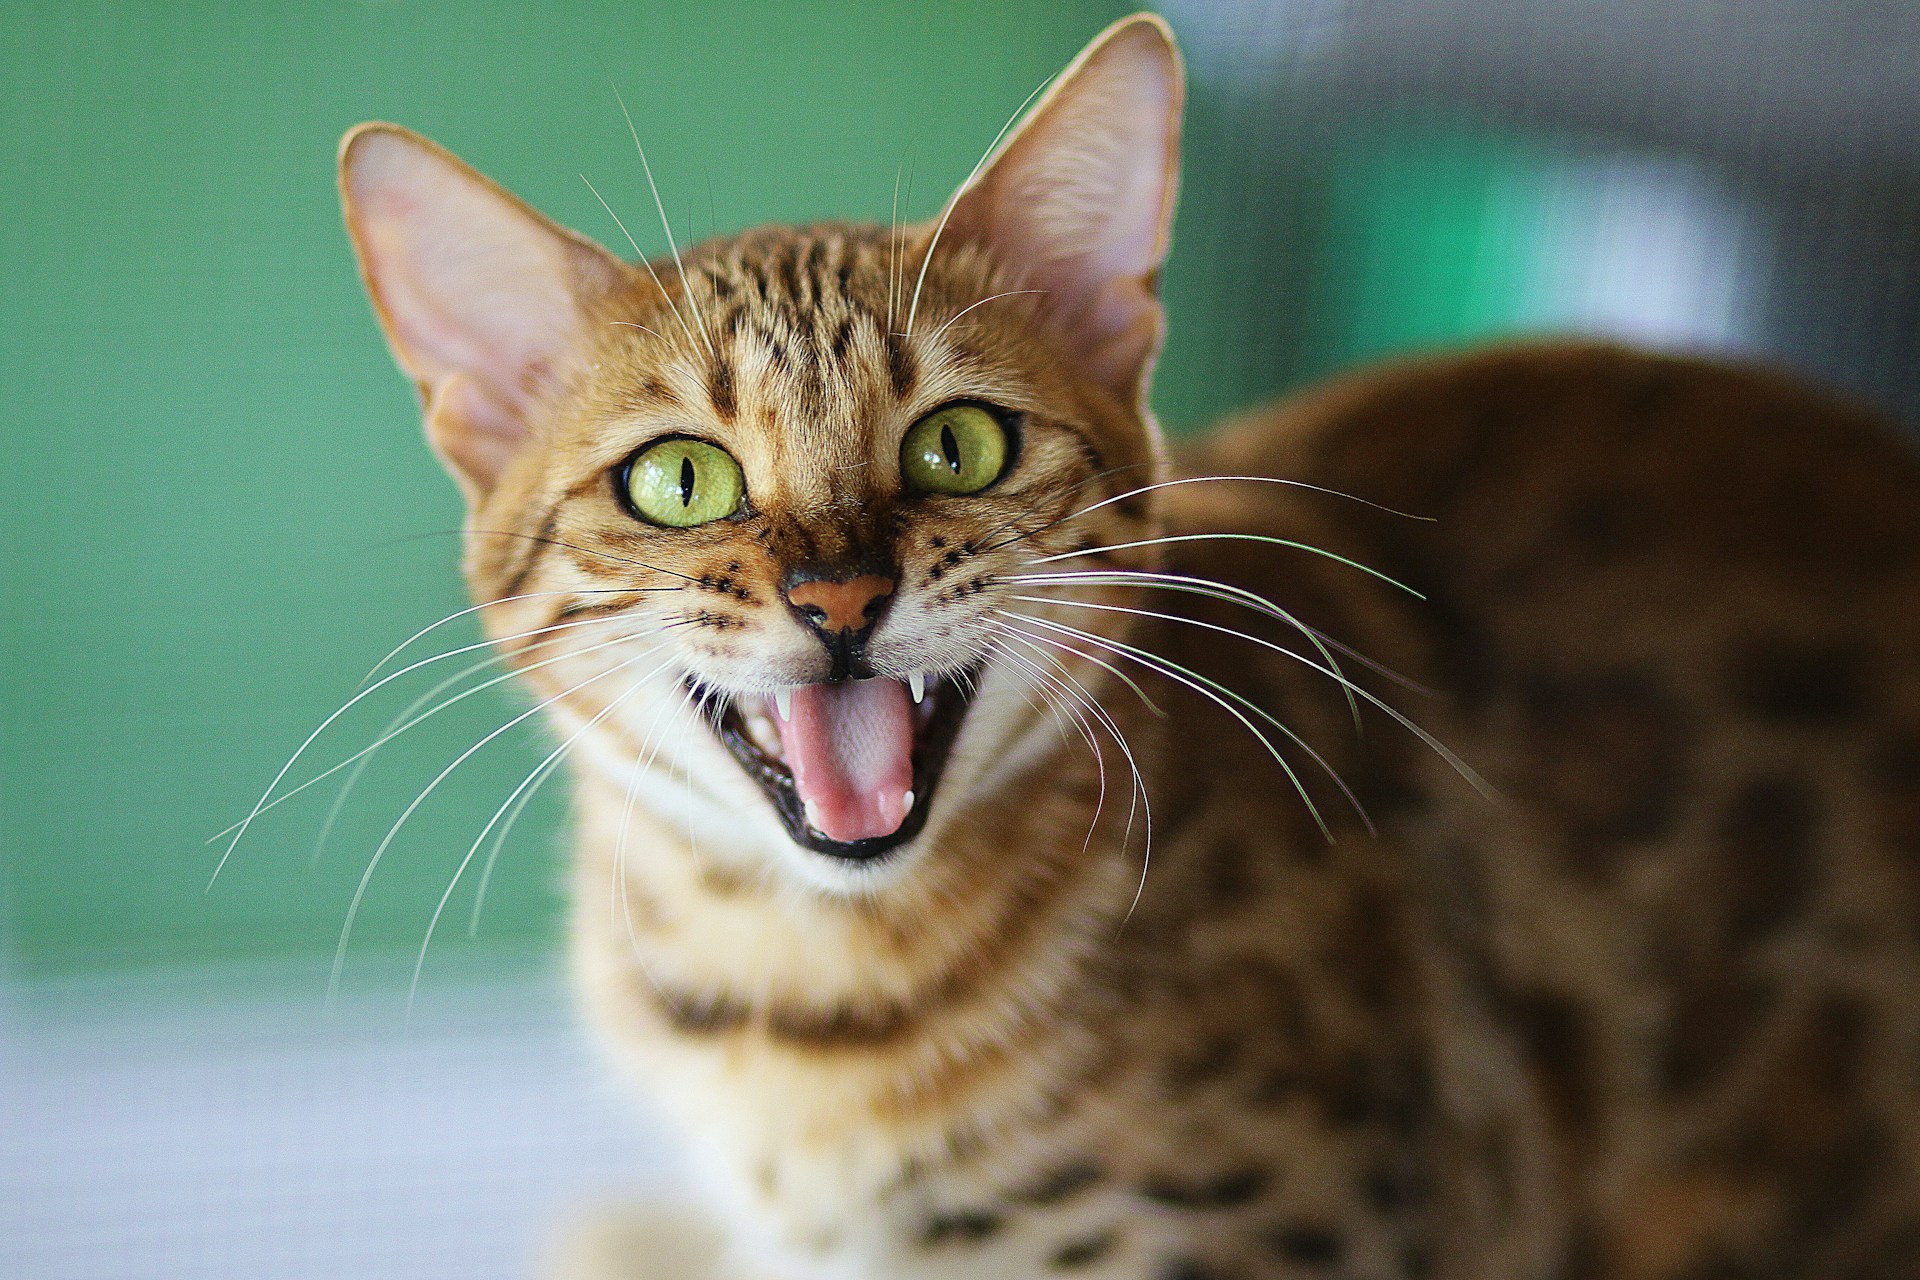 cat smiling against green background